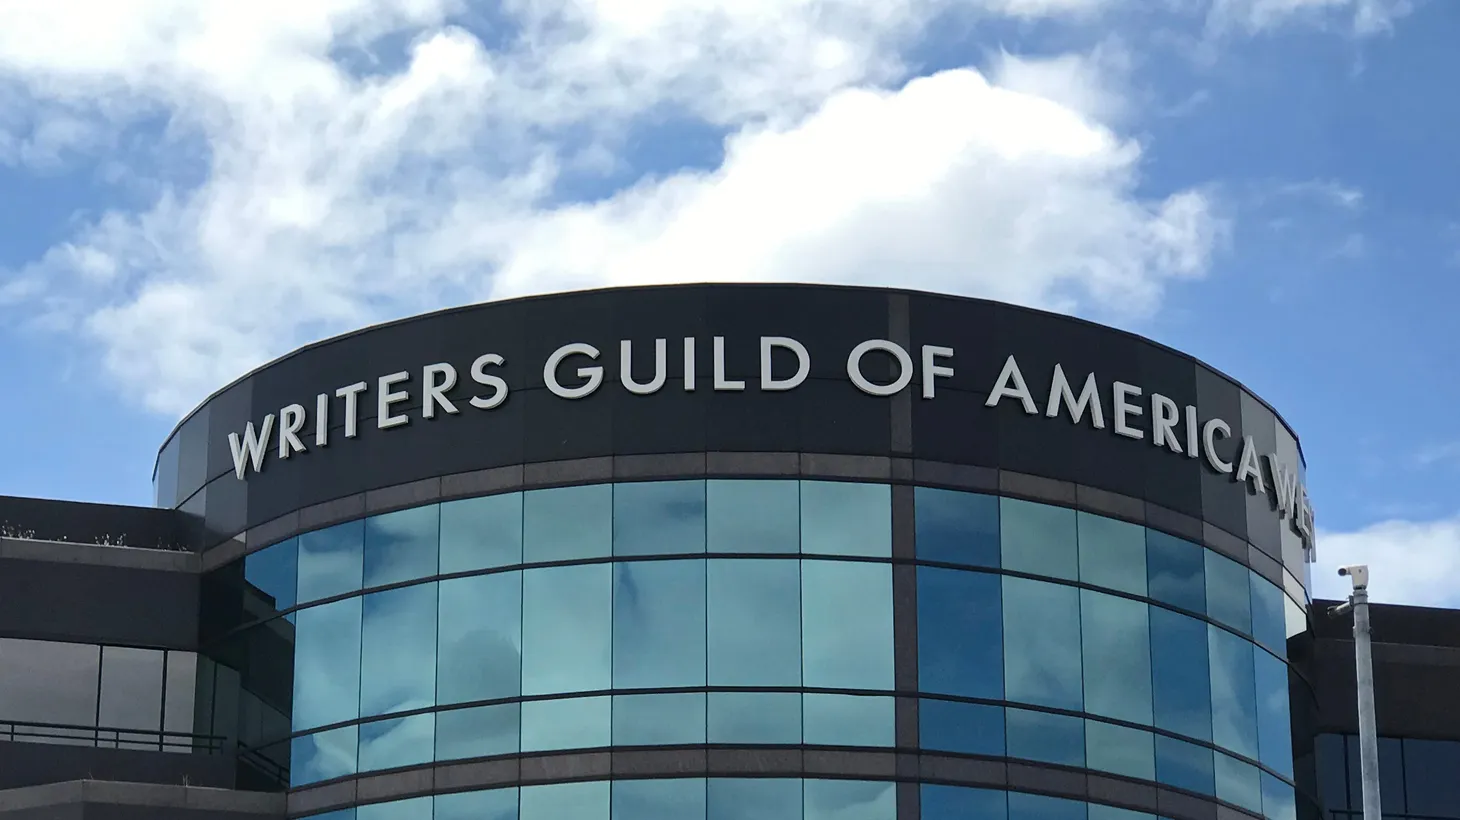 A close up image of the Writers Guild of America building located on the corner of Fairfax and Third St. in Los Angeles.